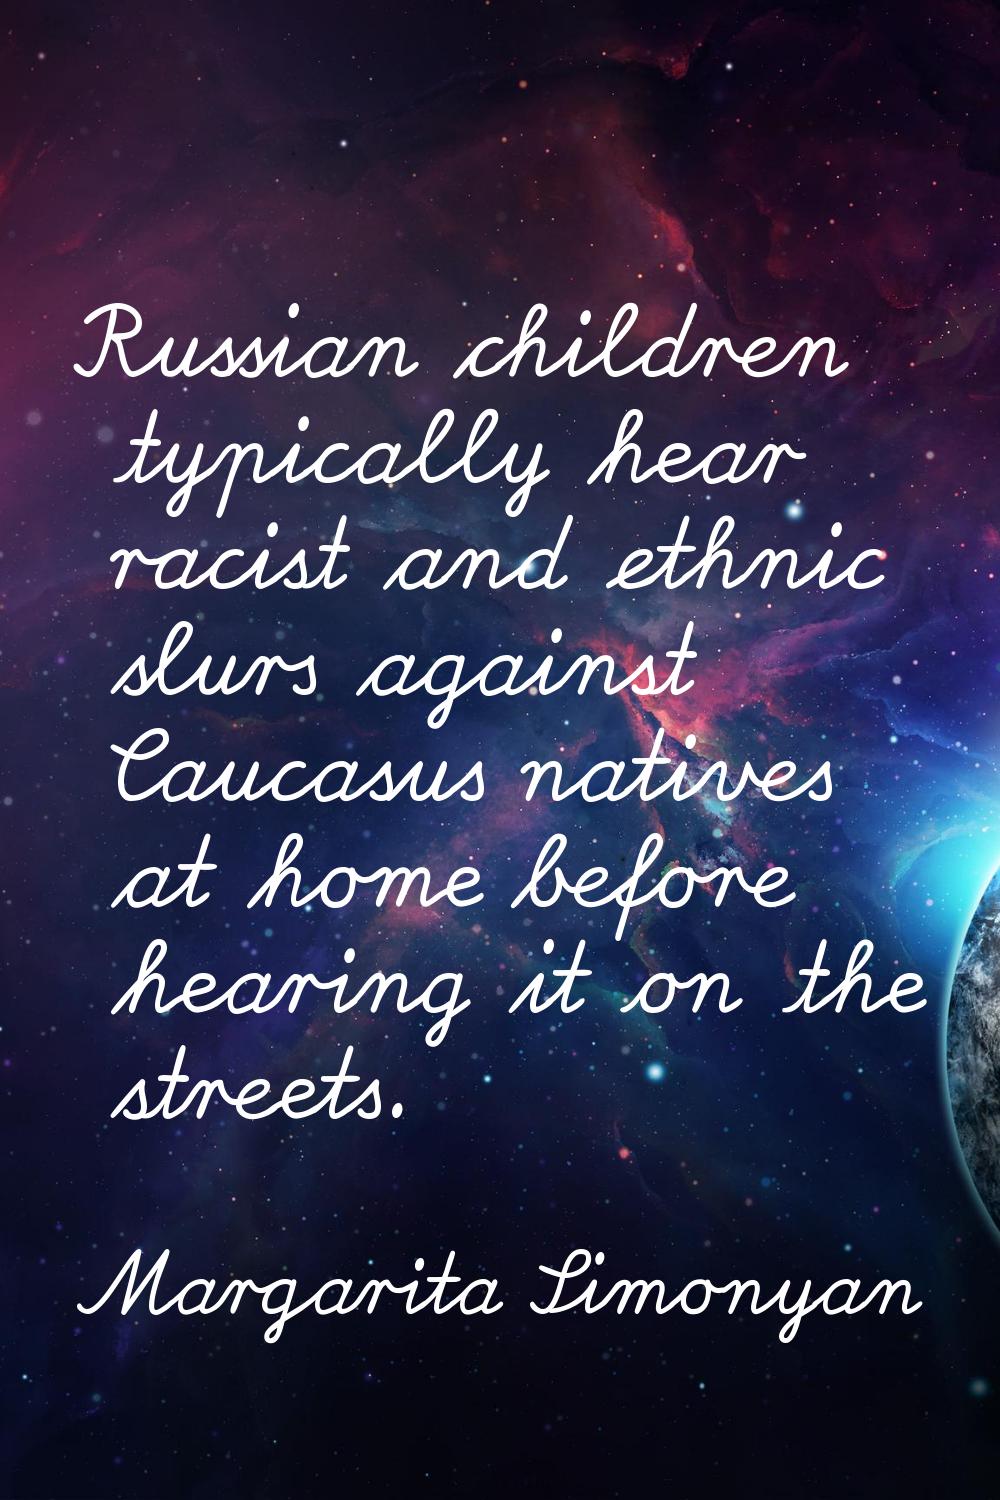 Russian children typically hear racist and ethnic slurs against Caucasus natives at home before hea